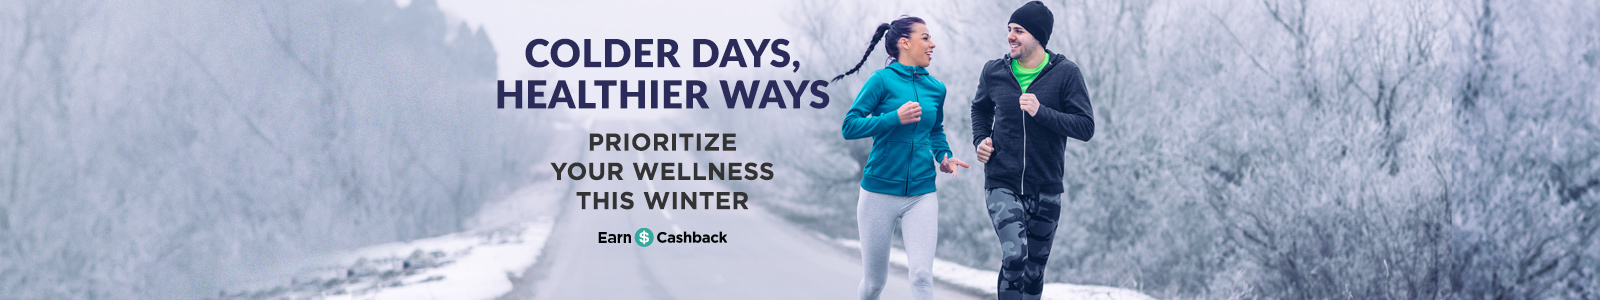 colder days, healthier ways. prioritize your wellness this winter. earn cashback